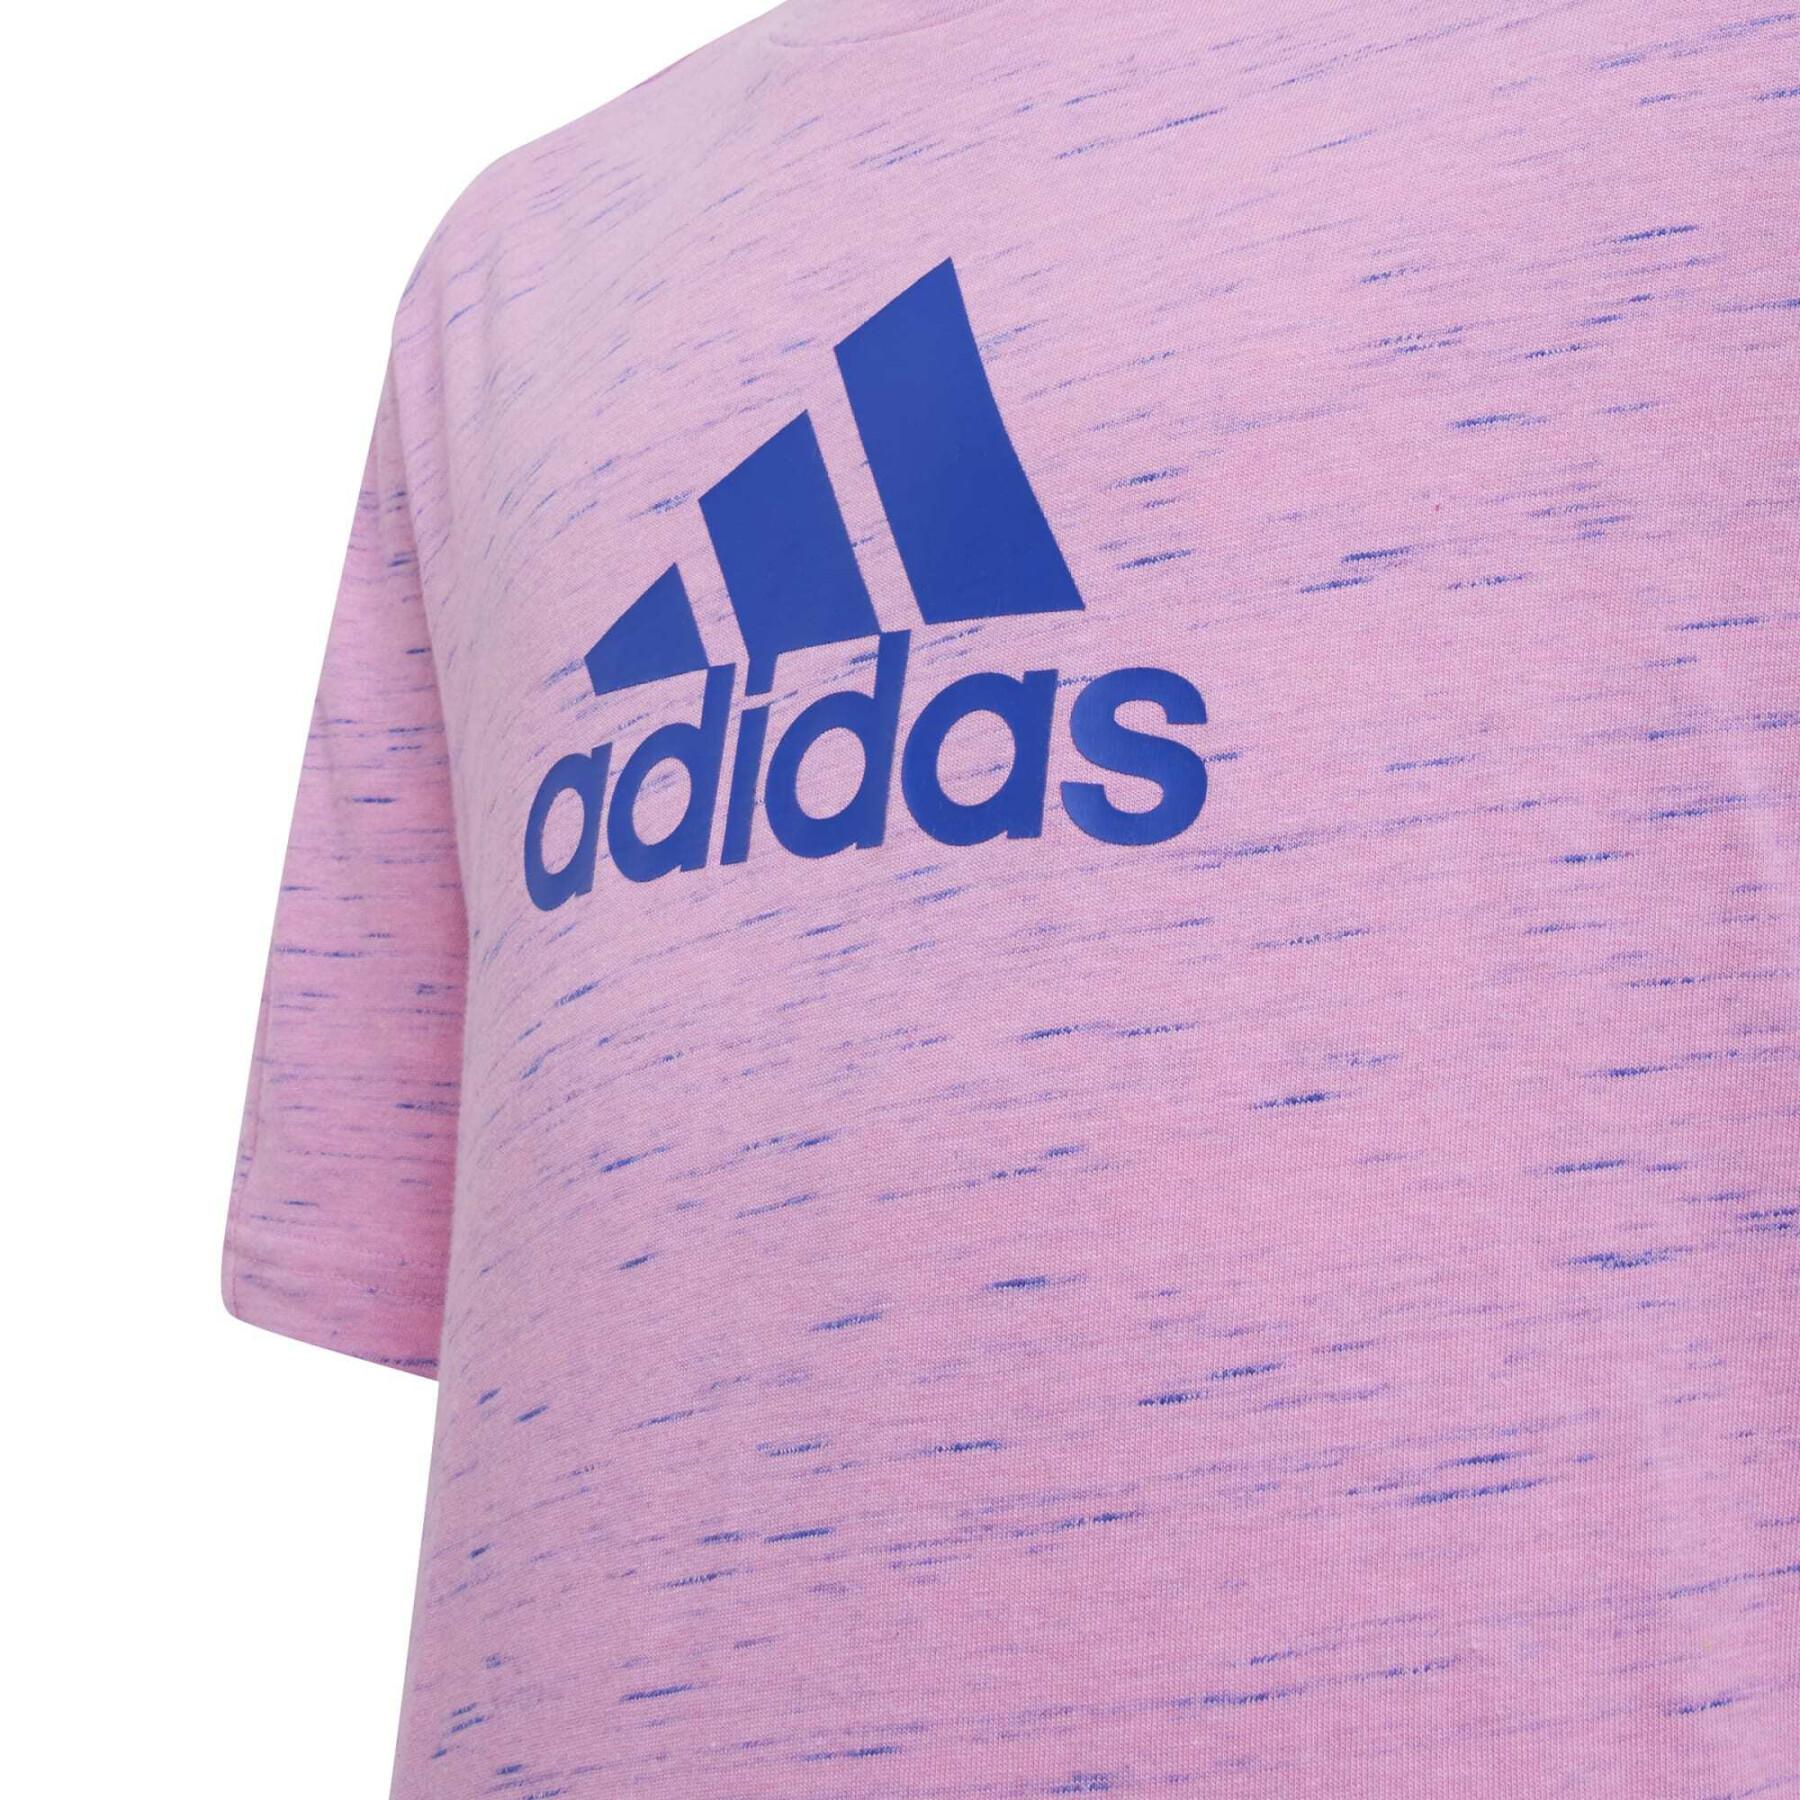 T-shirt with children's sports logo badge adidas Future Icons